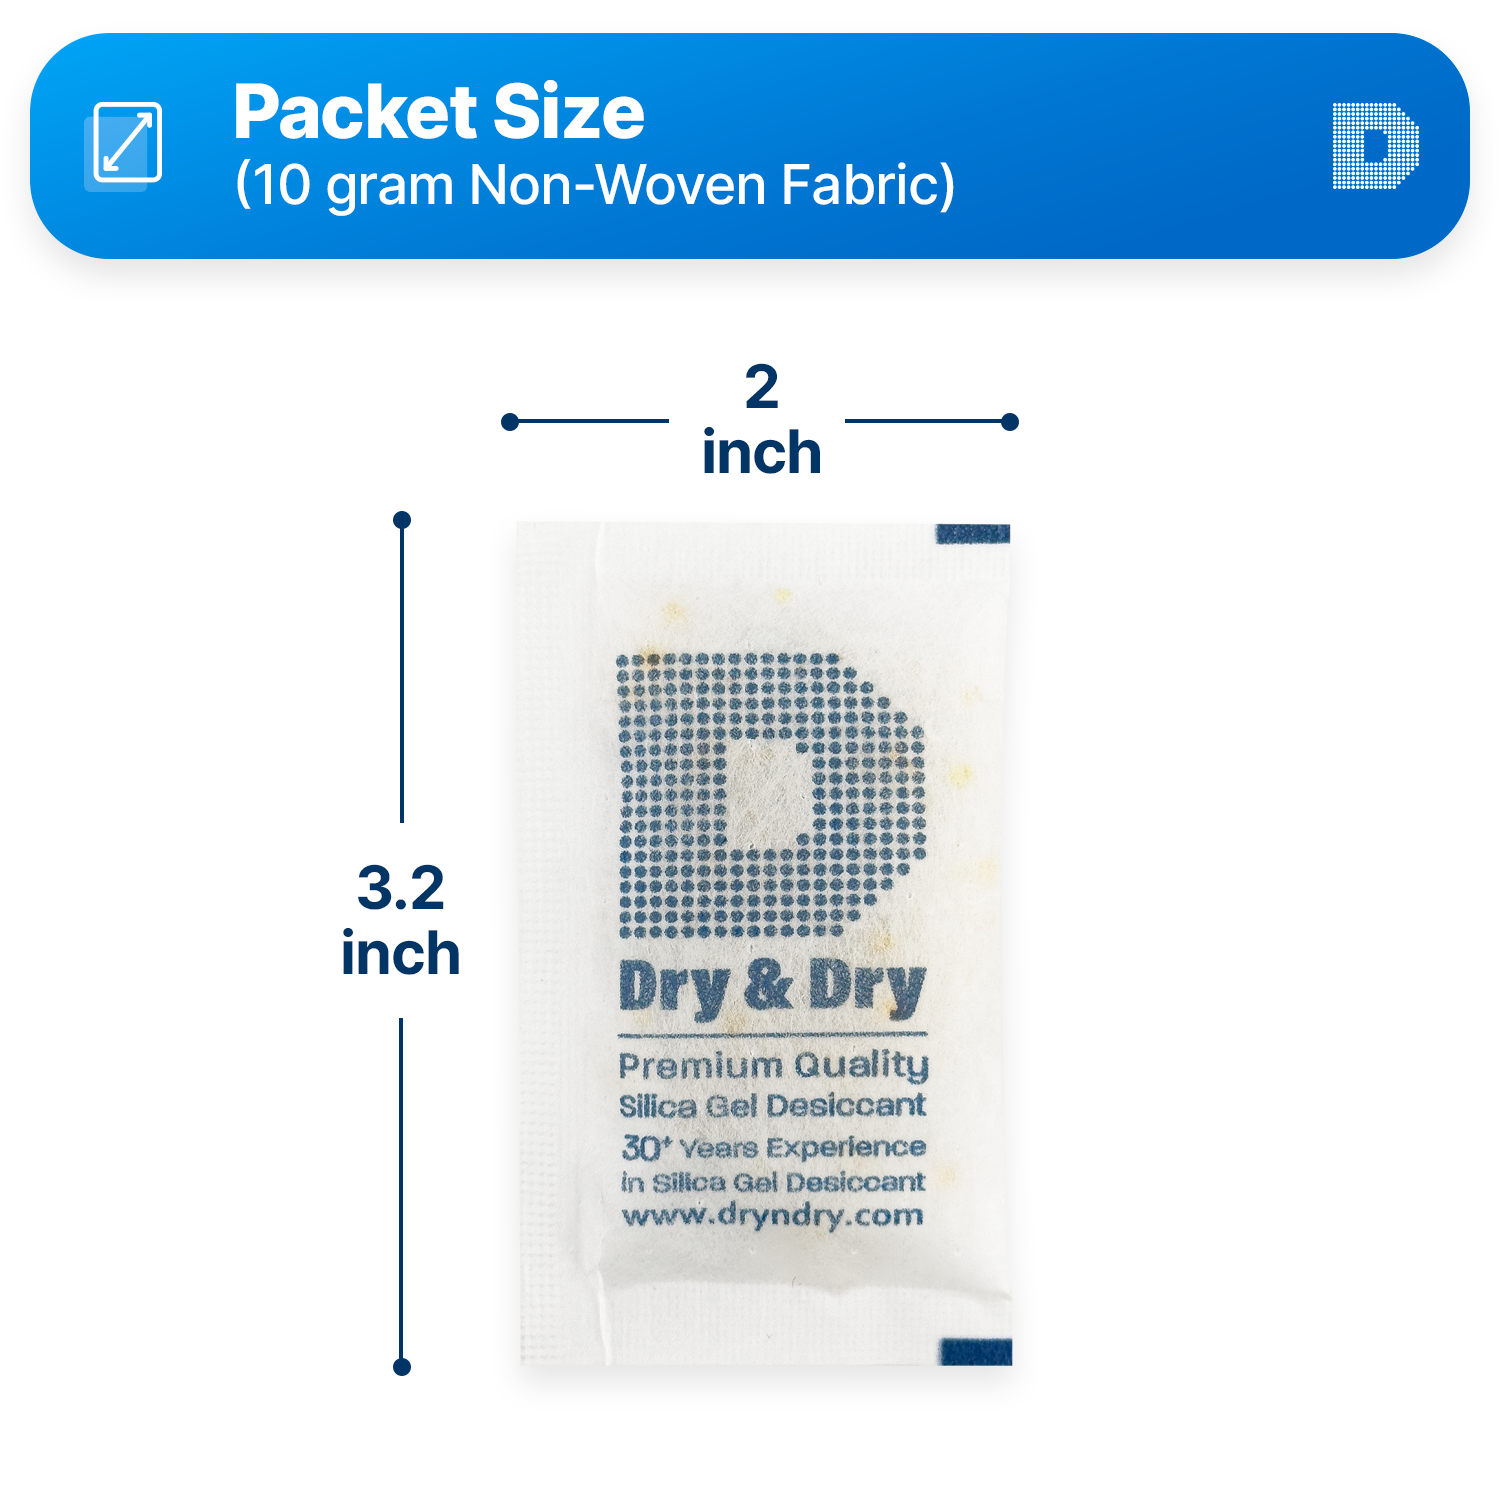 10 Gram [1700 Packets] "Dry & Dry" Premium Orange Indicating Silica Gel Desiccant Packets - Rechargeable Non-Woven Fabric (Cloth)